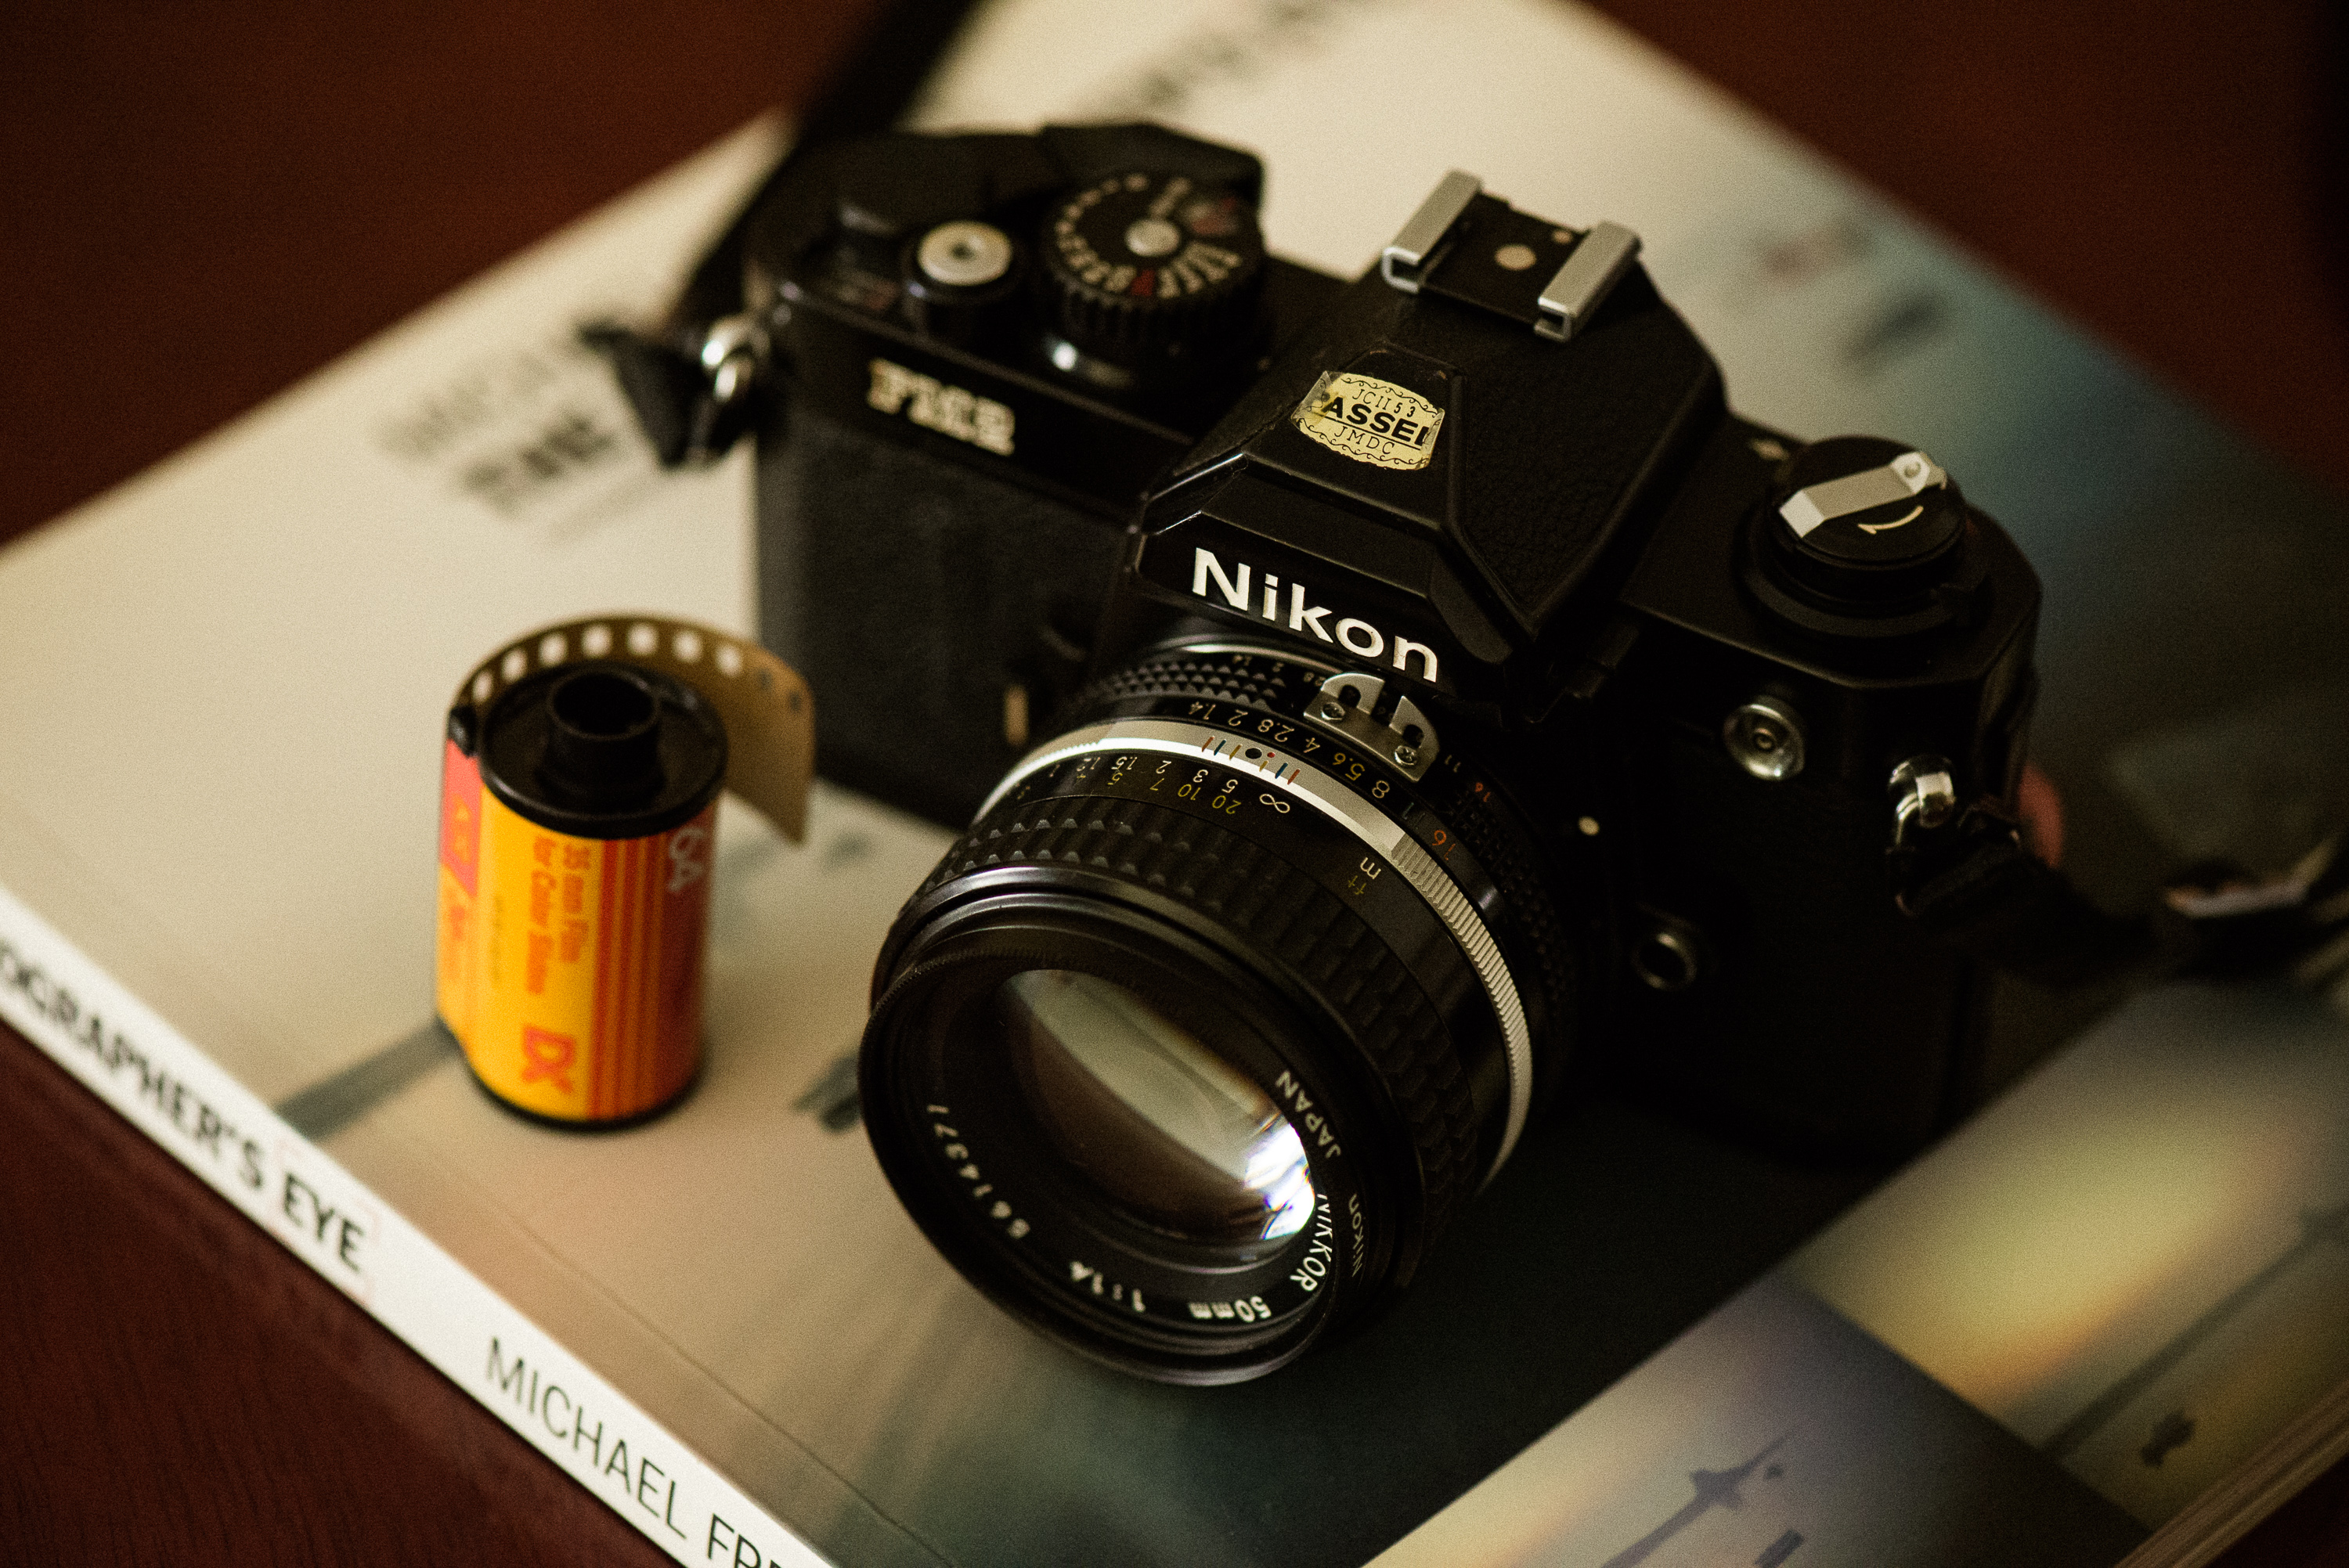 Opinion: A Nikon Retro Mirrorless Camera is Everything We Want